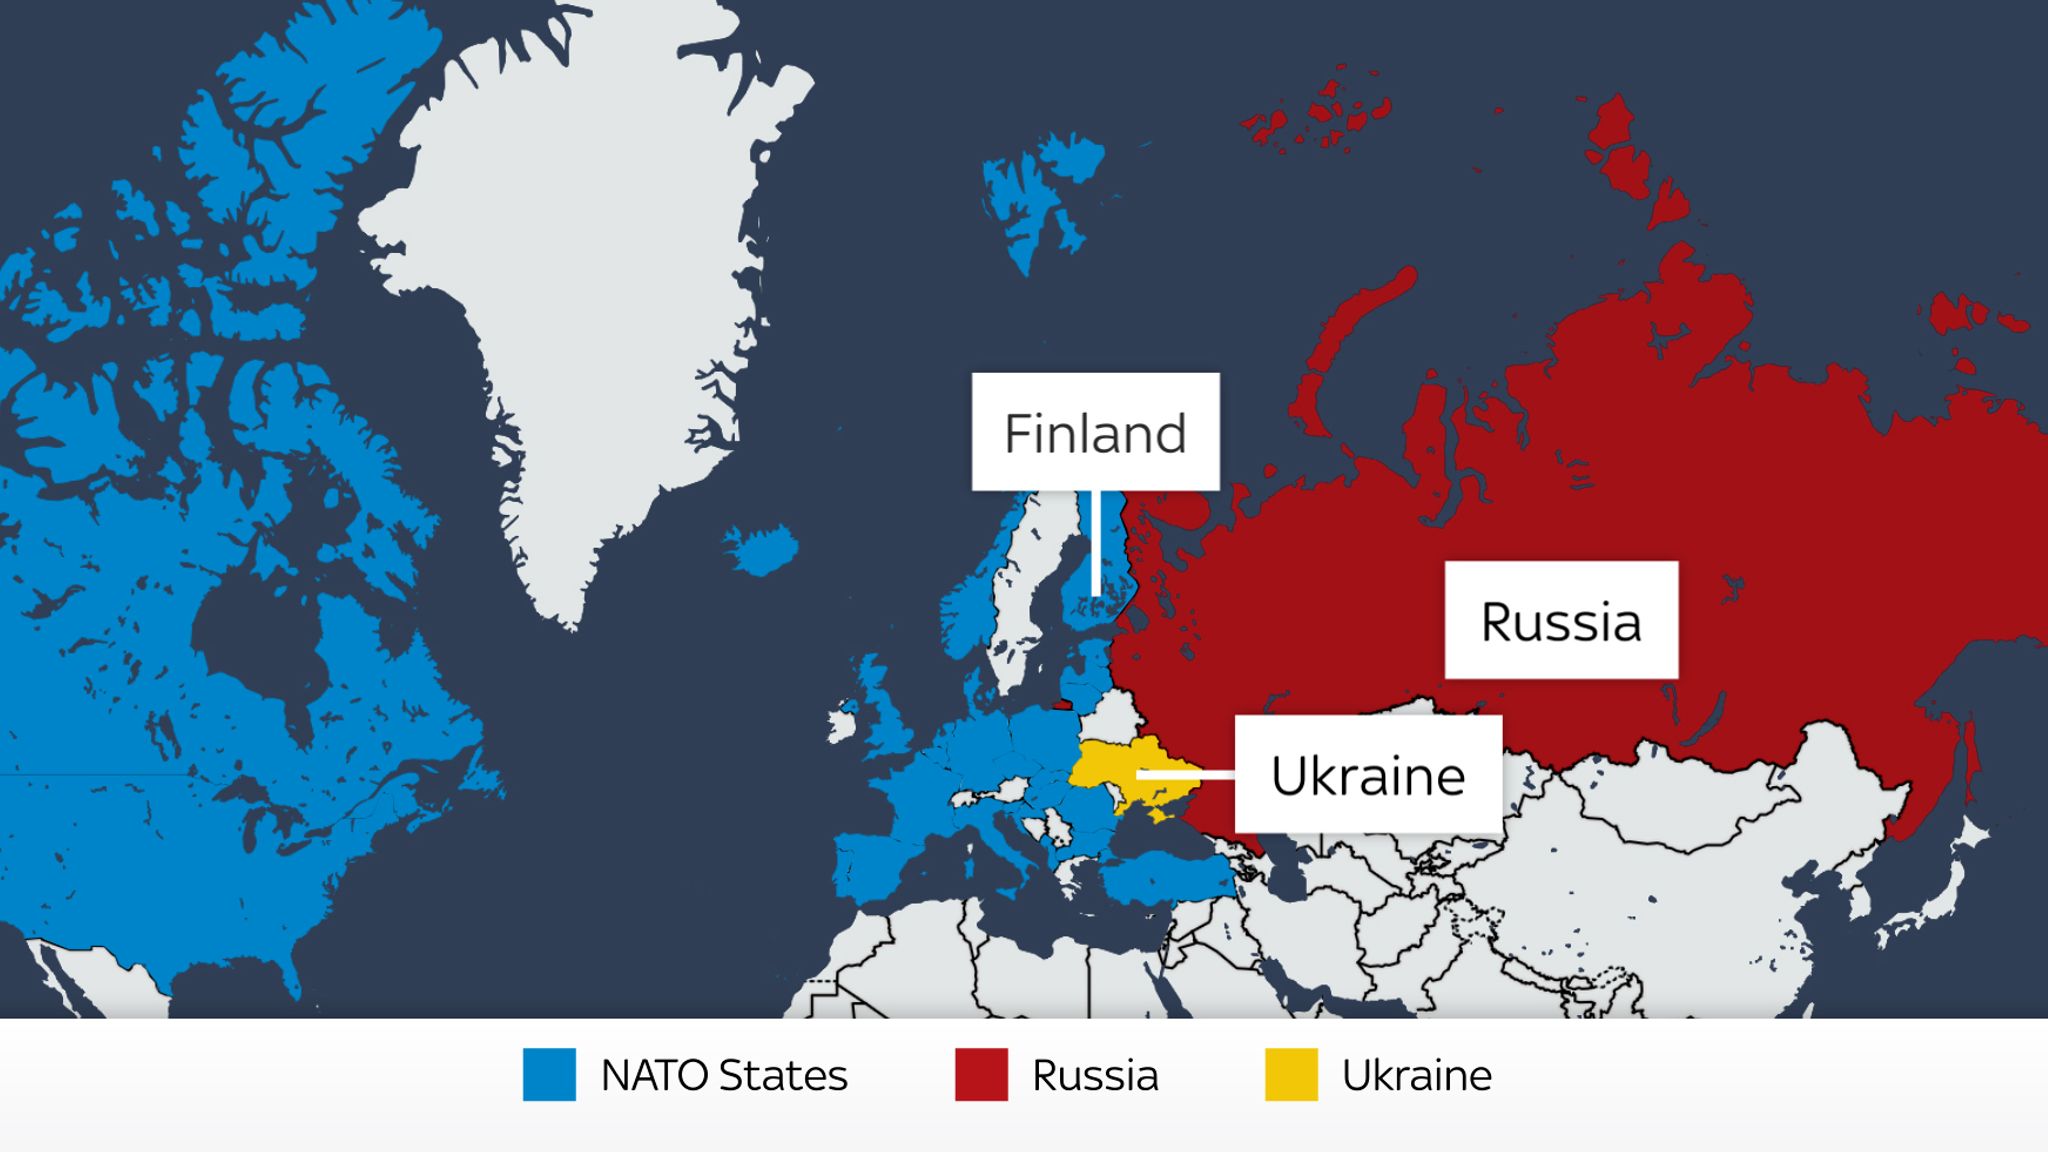 NATO gives Finland protection but what can a new member offer NATO